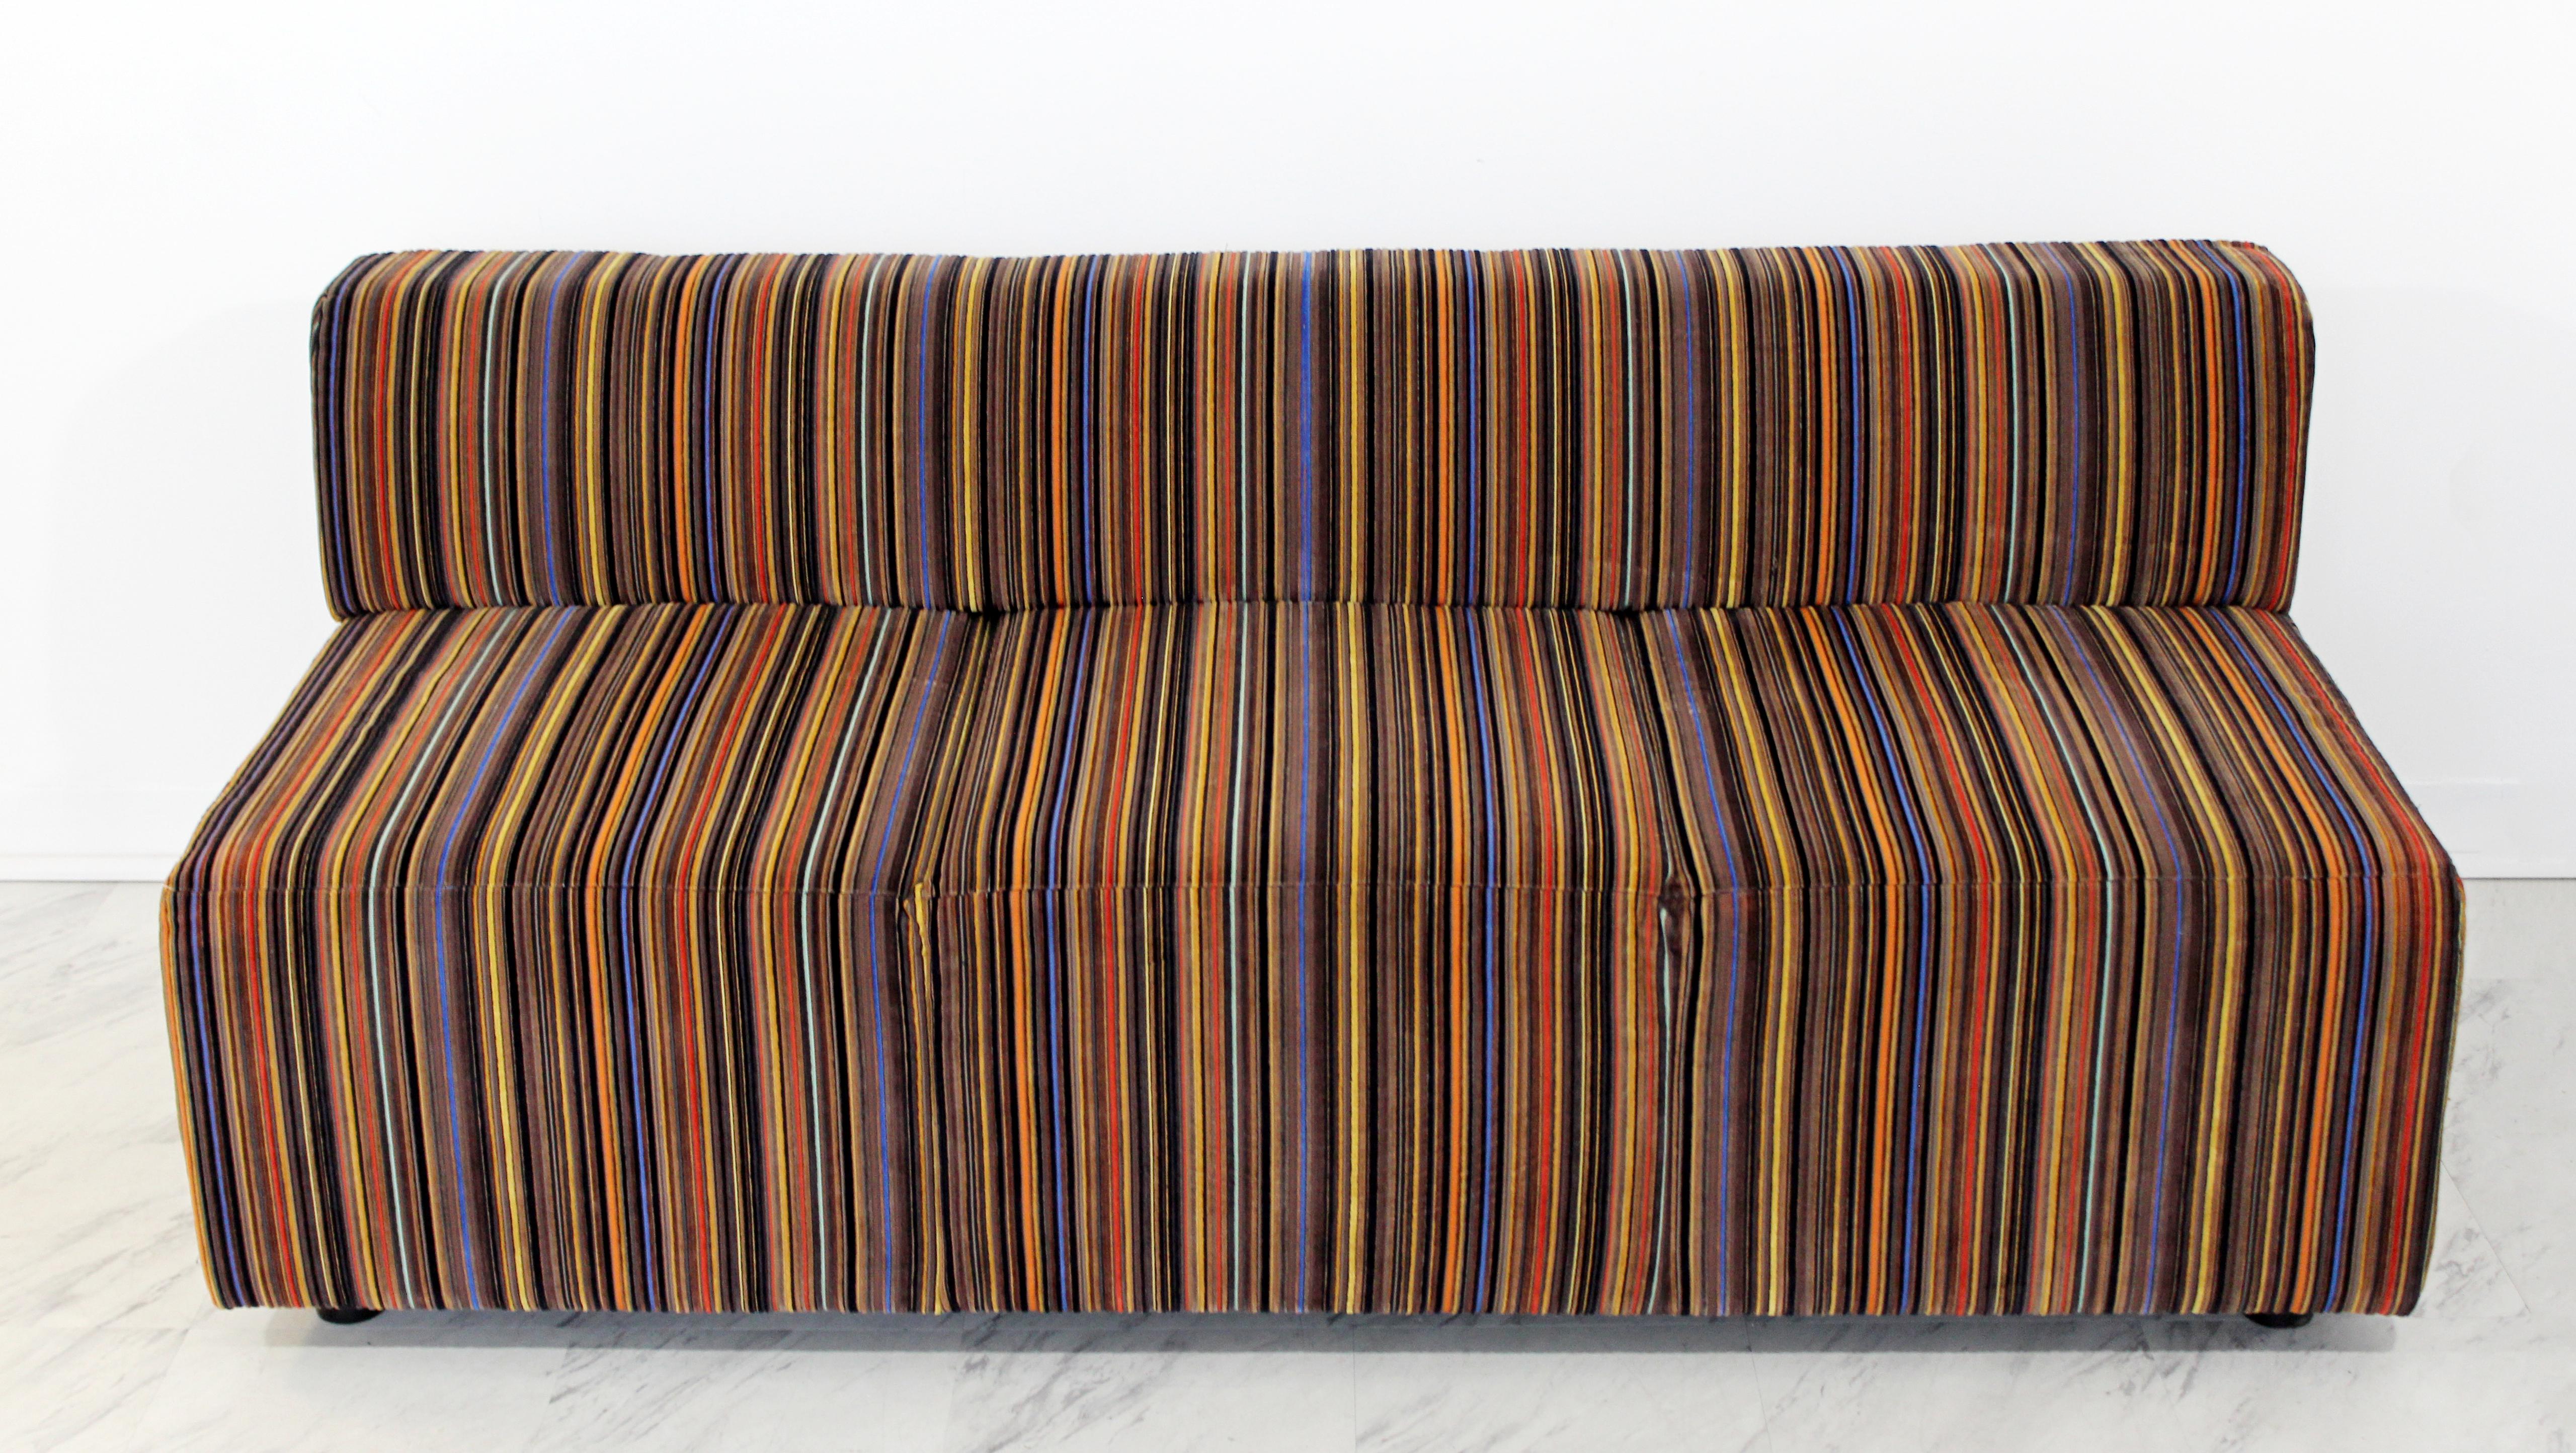 For your consideration is a marvelous, striped sofa or loveseat, by Coalesse, circa 2010. In excellent condition. The dimensions are 66